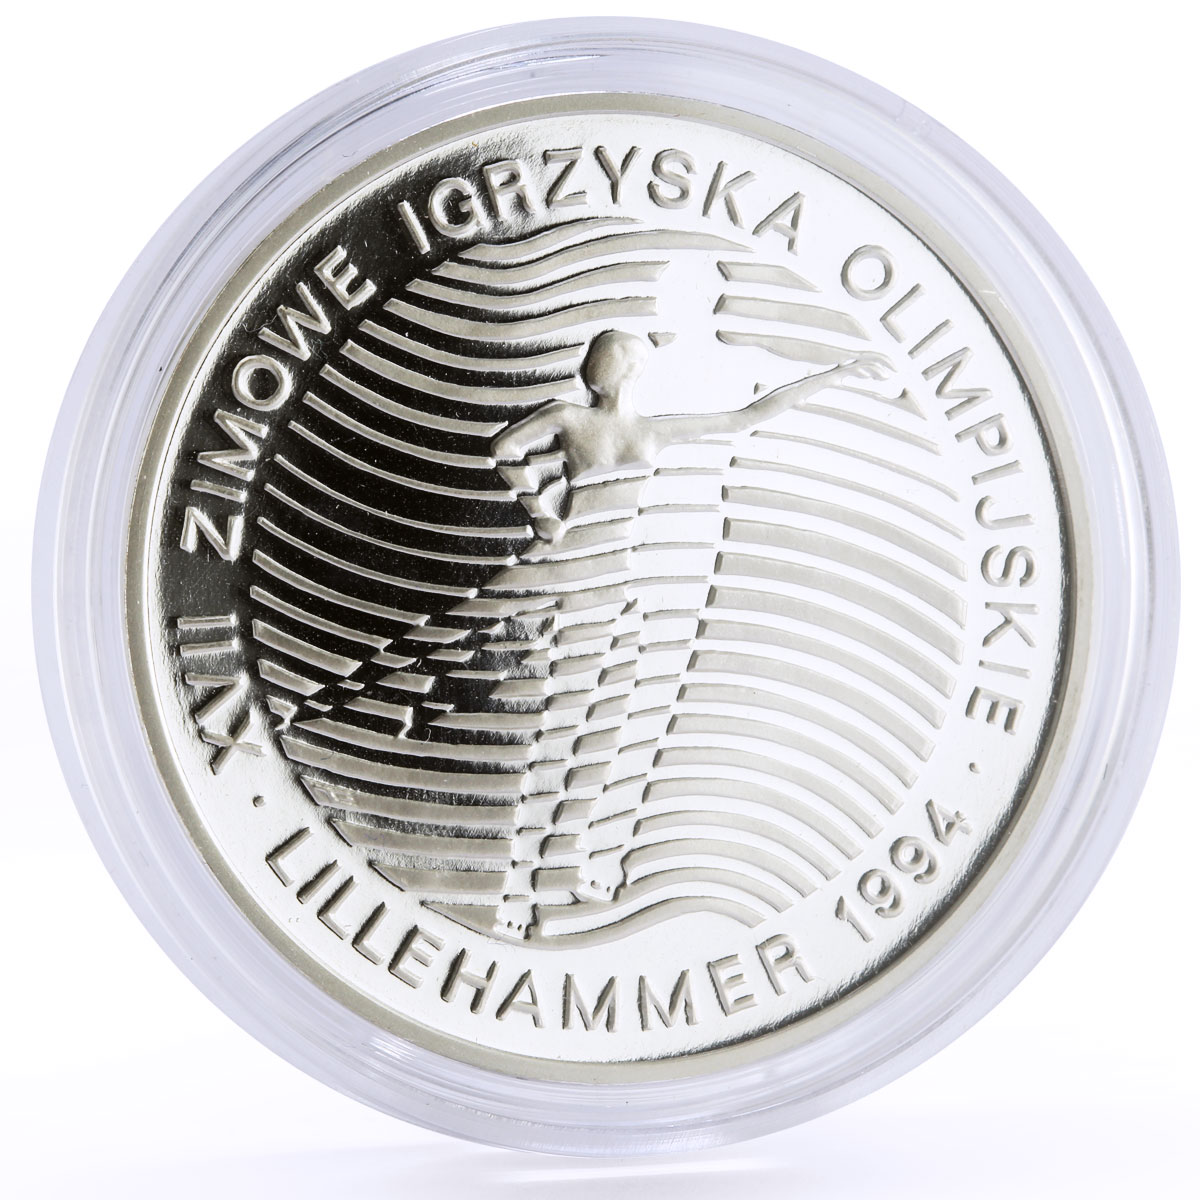 Poland 300000 zlotych Lillehammer Olympic Games Figure Skating silver coin 1993